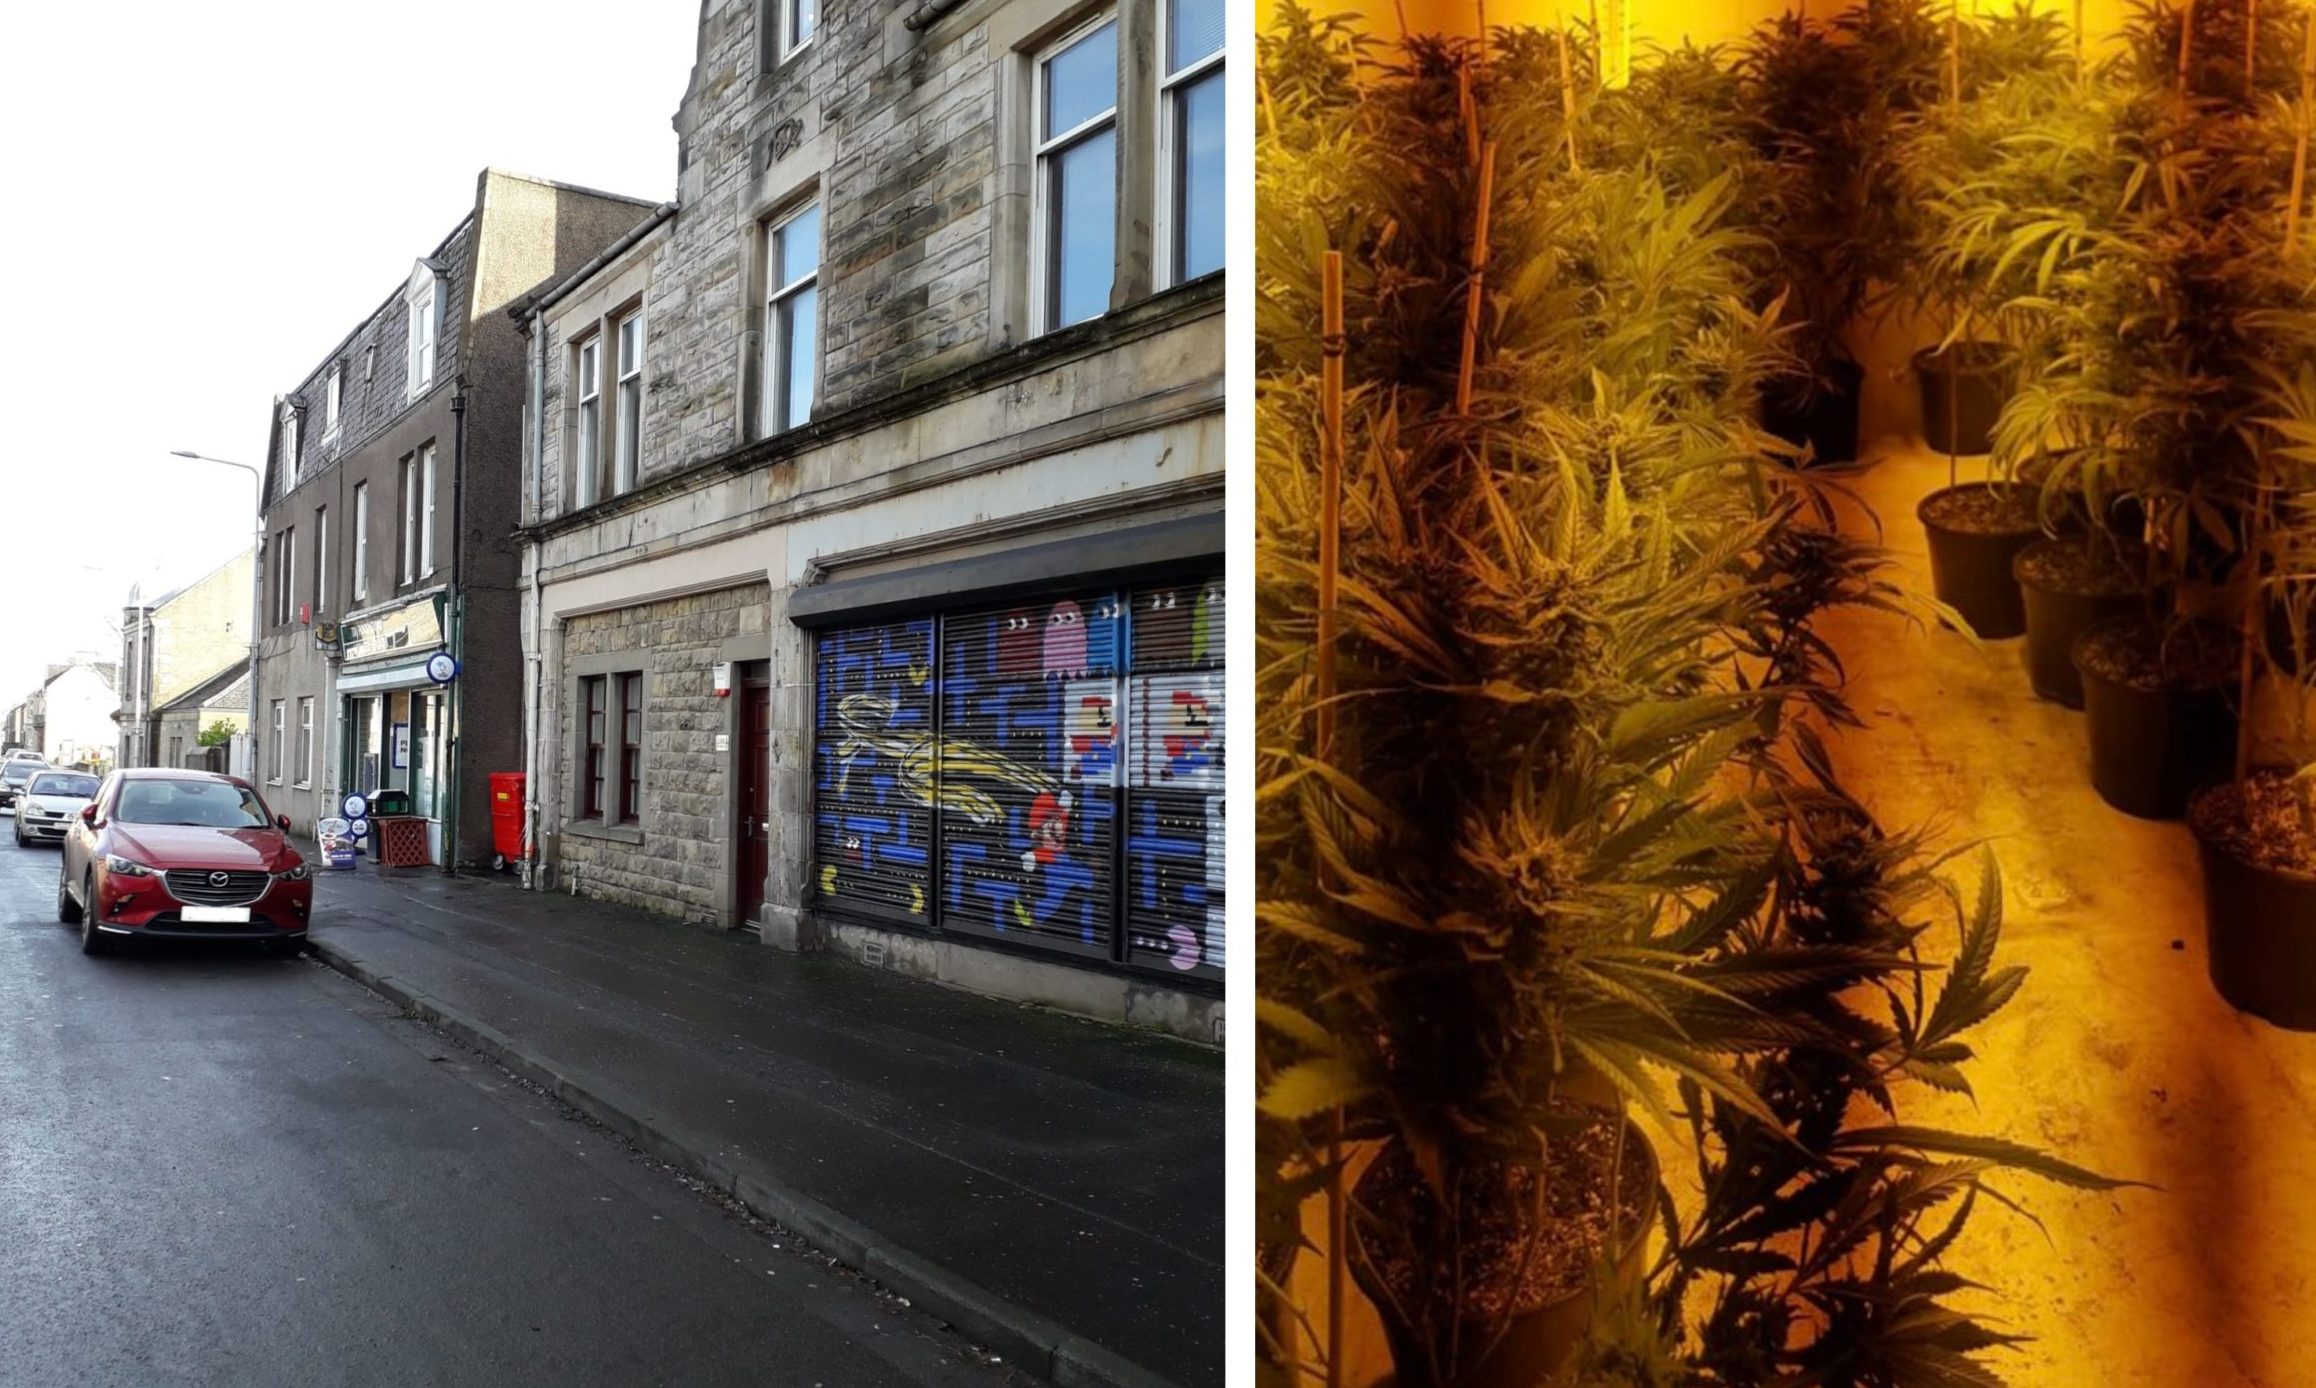 Fife police said the cannabis plant haul on Randolph Street was similar to the one pictured on the right of this photo.